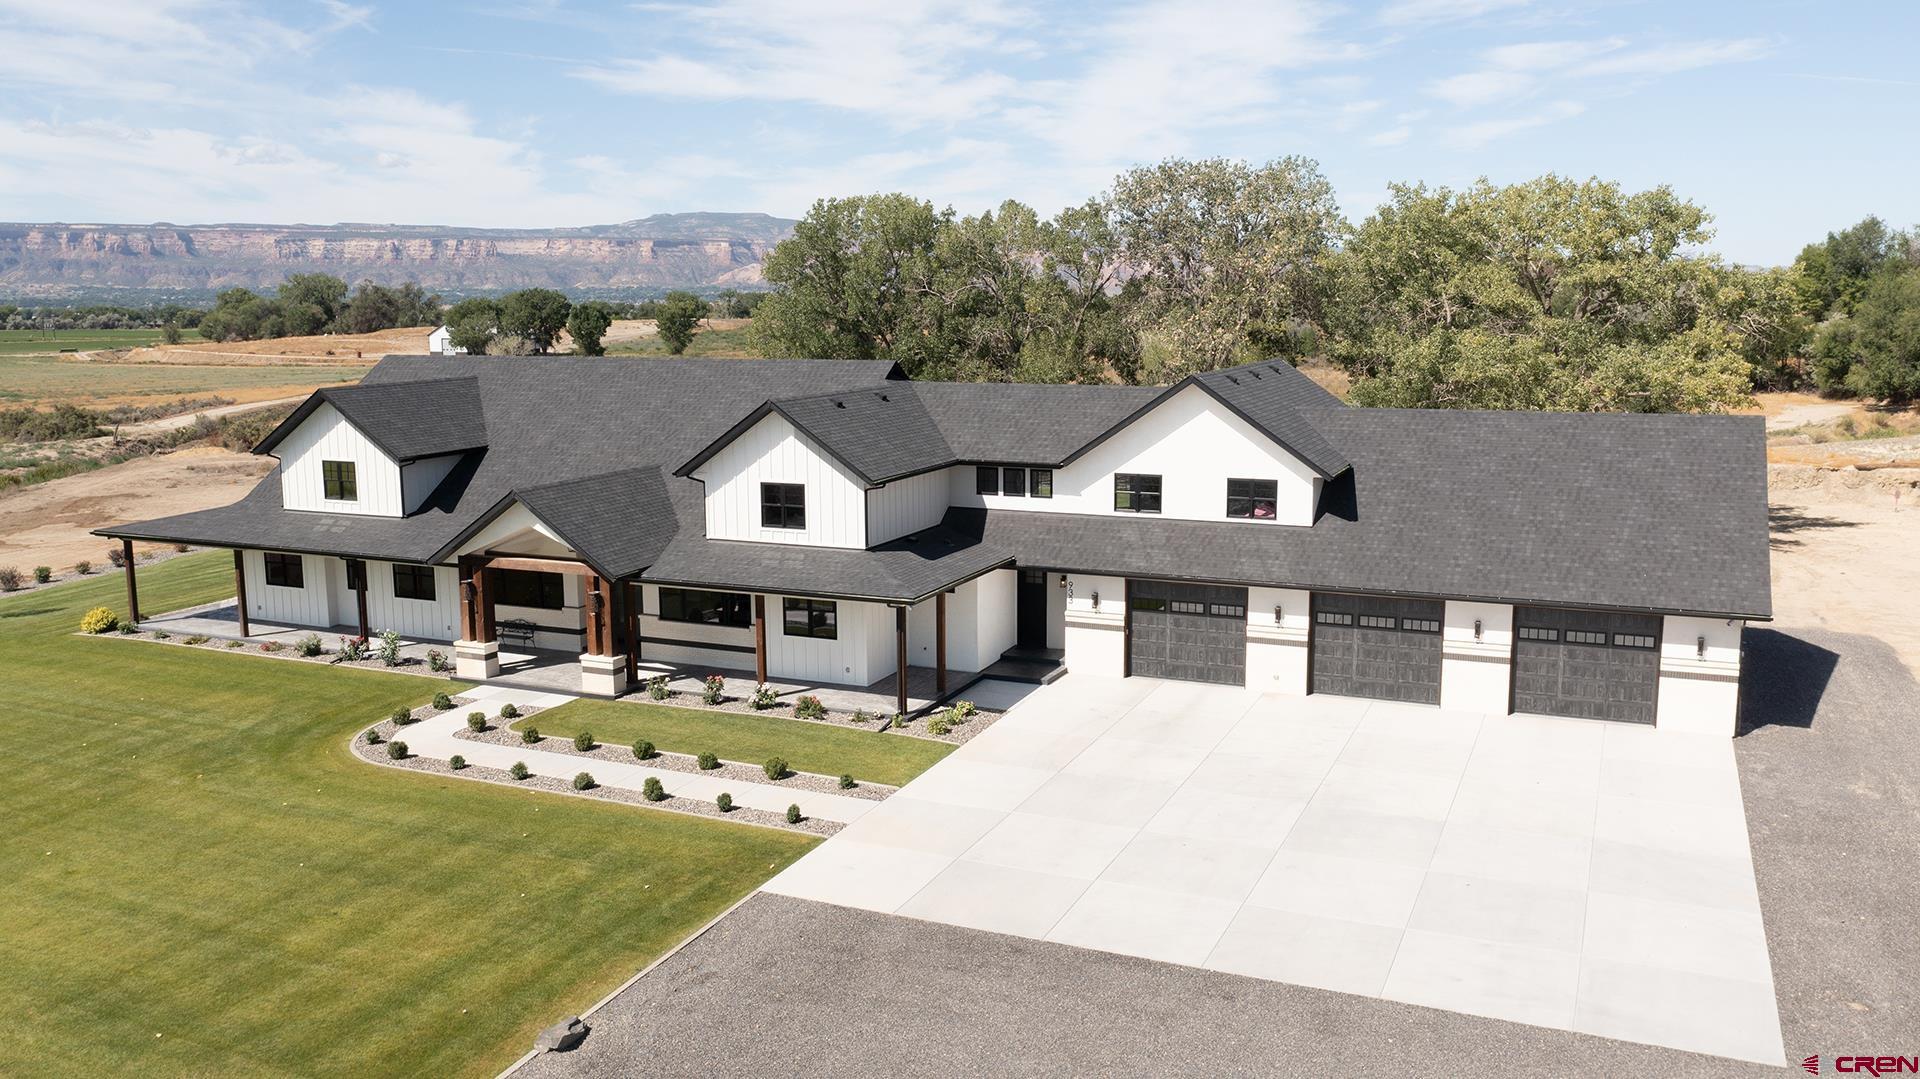 933 24 Road, Grand Junction, CO 